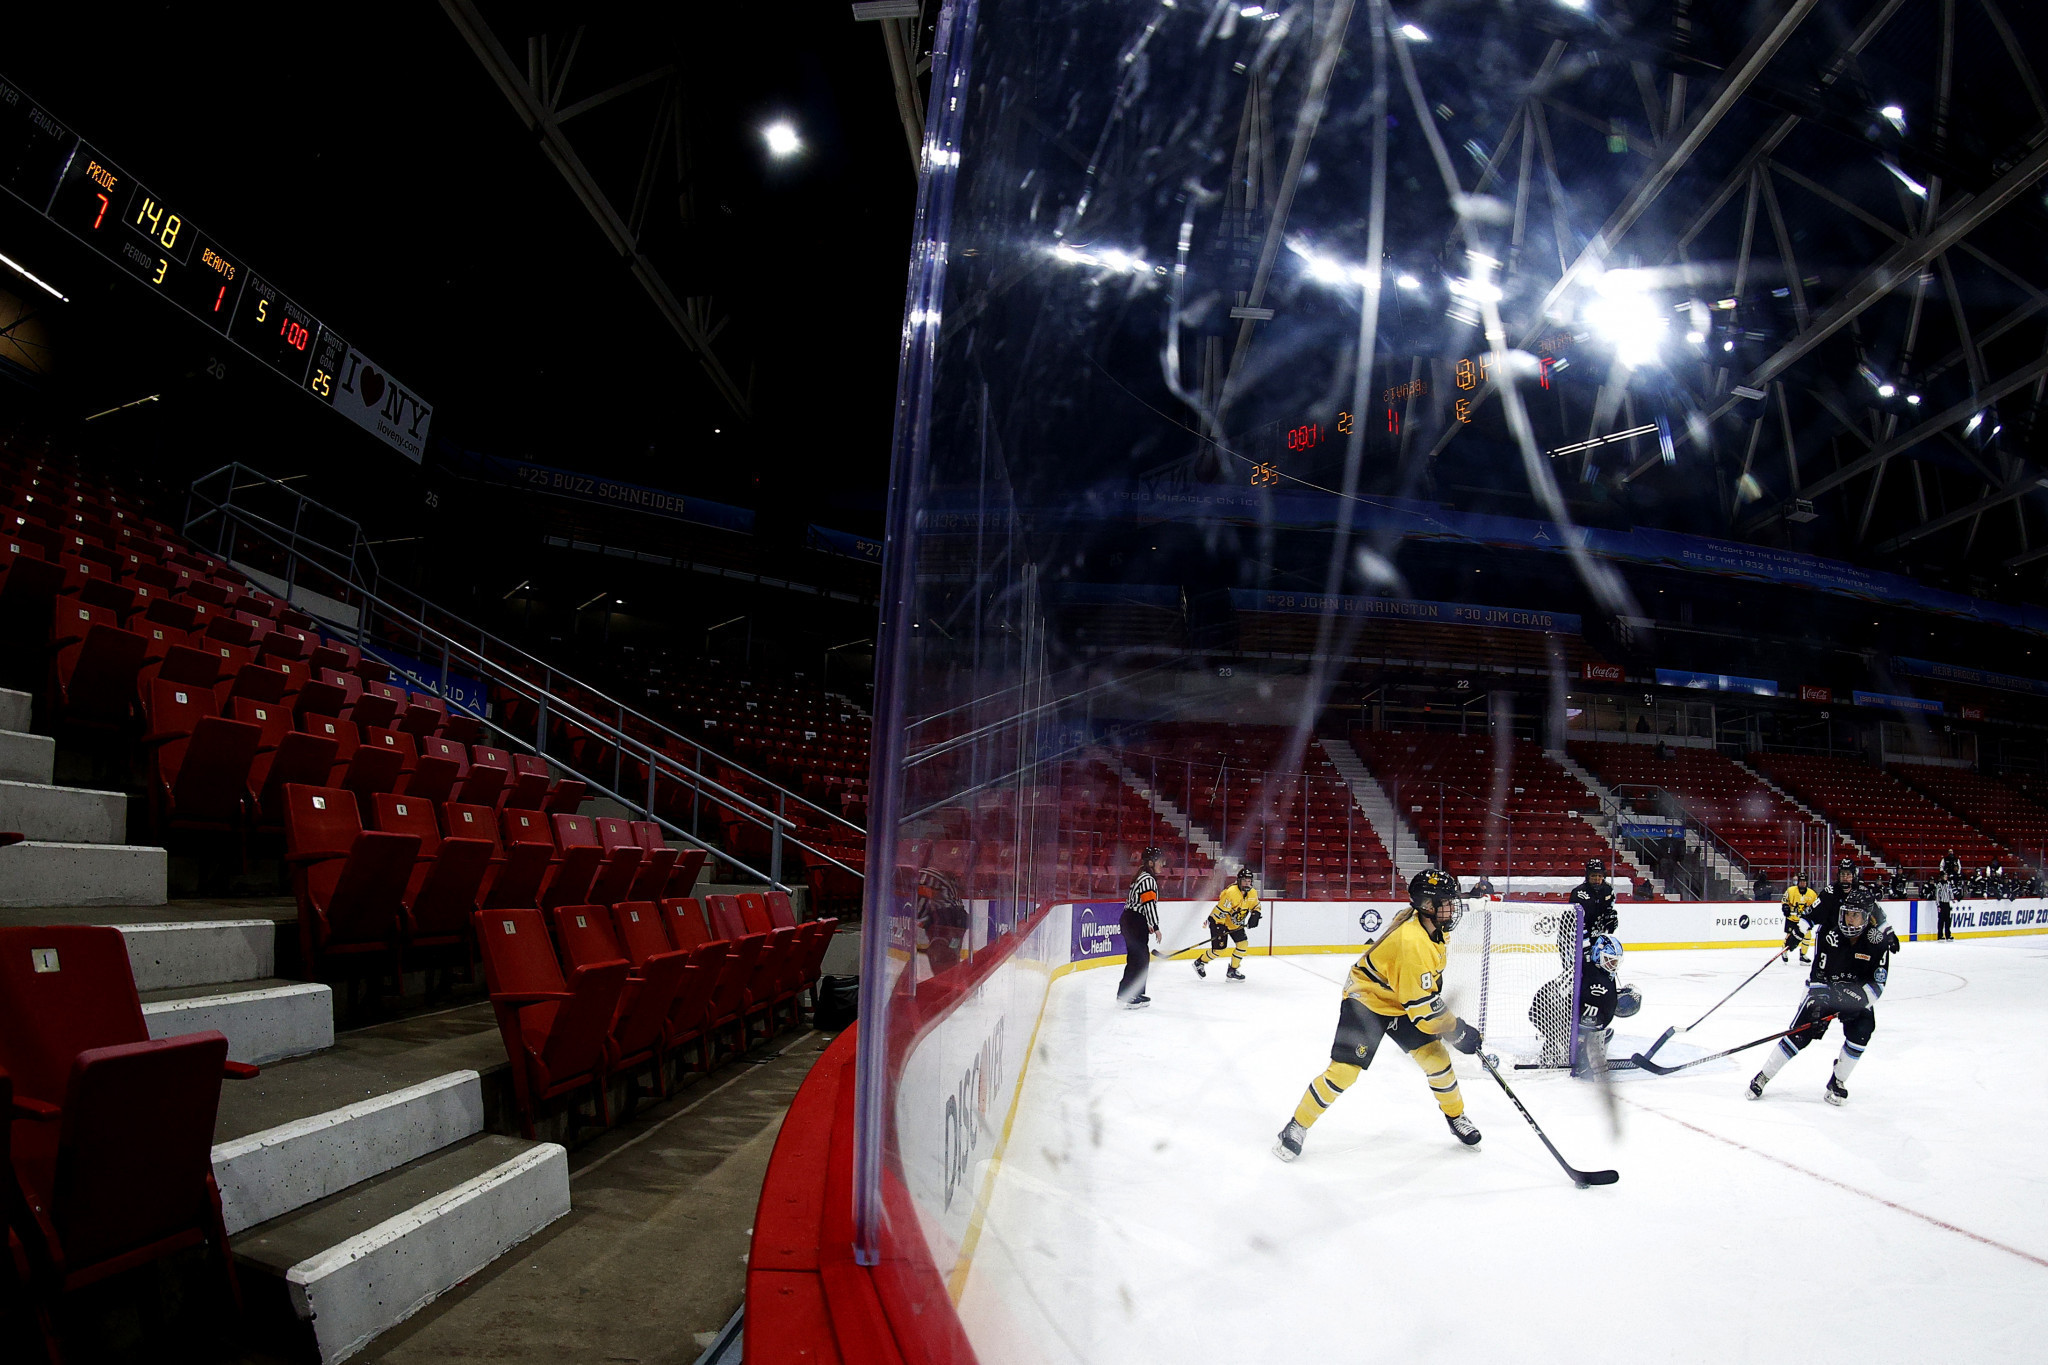 The Golden Arrow Lakeside Resort is located close to the Herb Brooks Arena which is set to host the ice hockey competitions during Lake Placid 2023 ©Getty Images